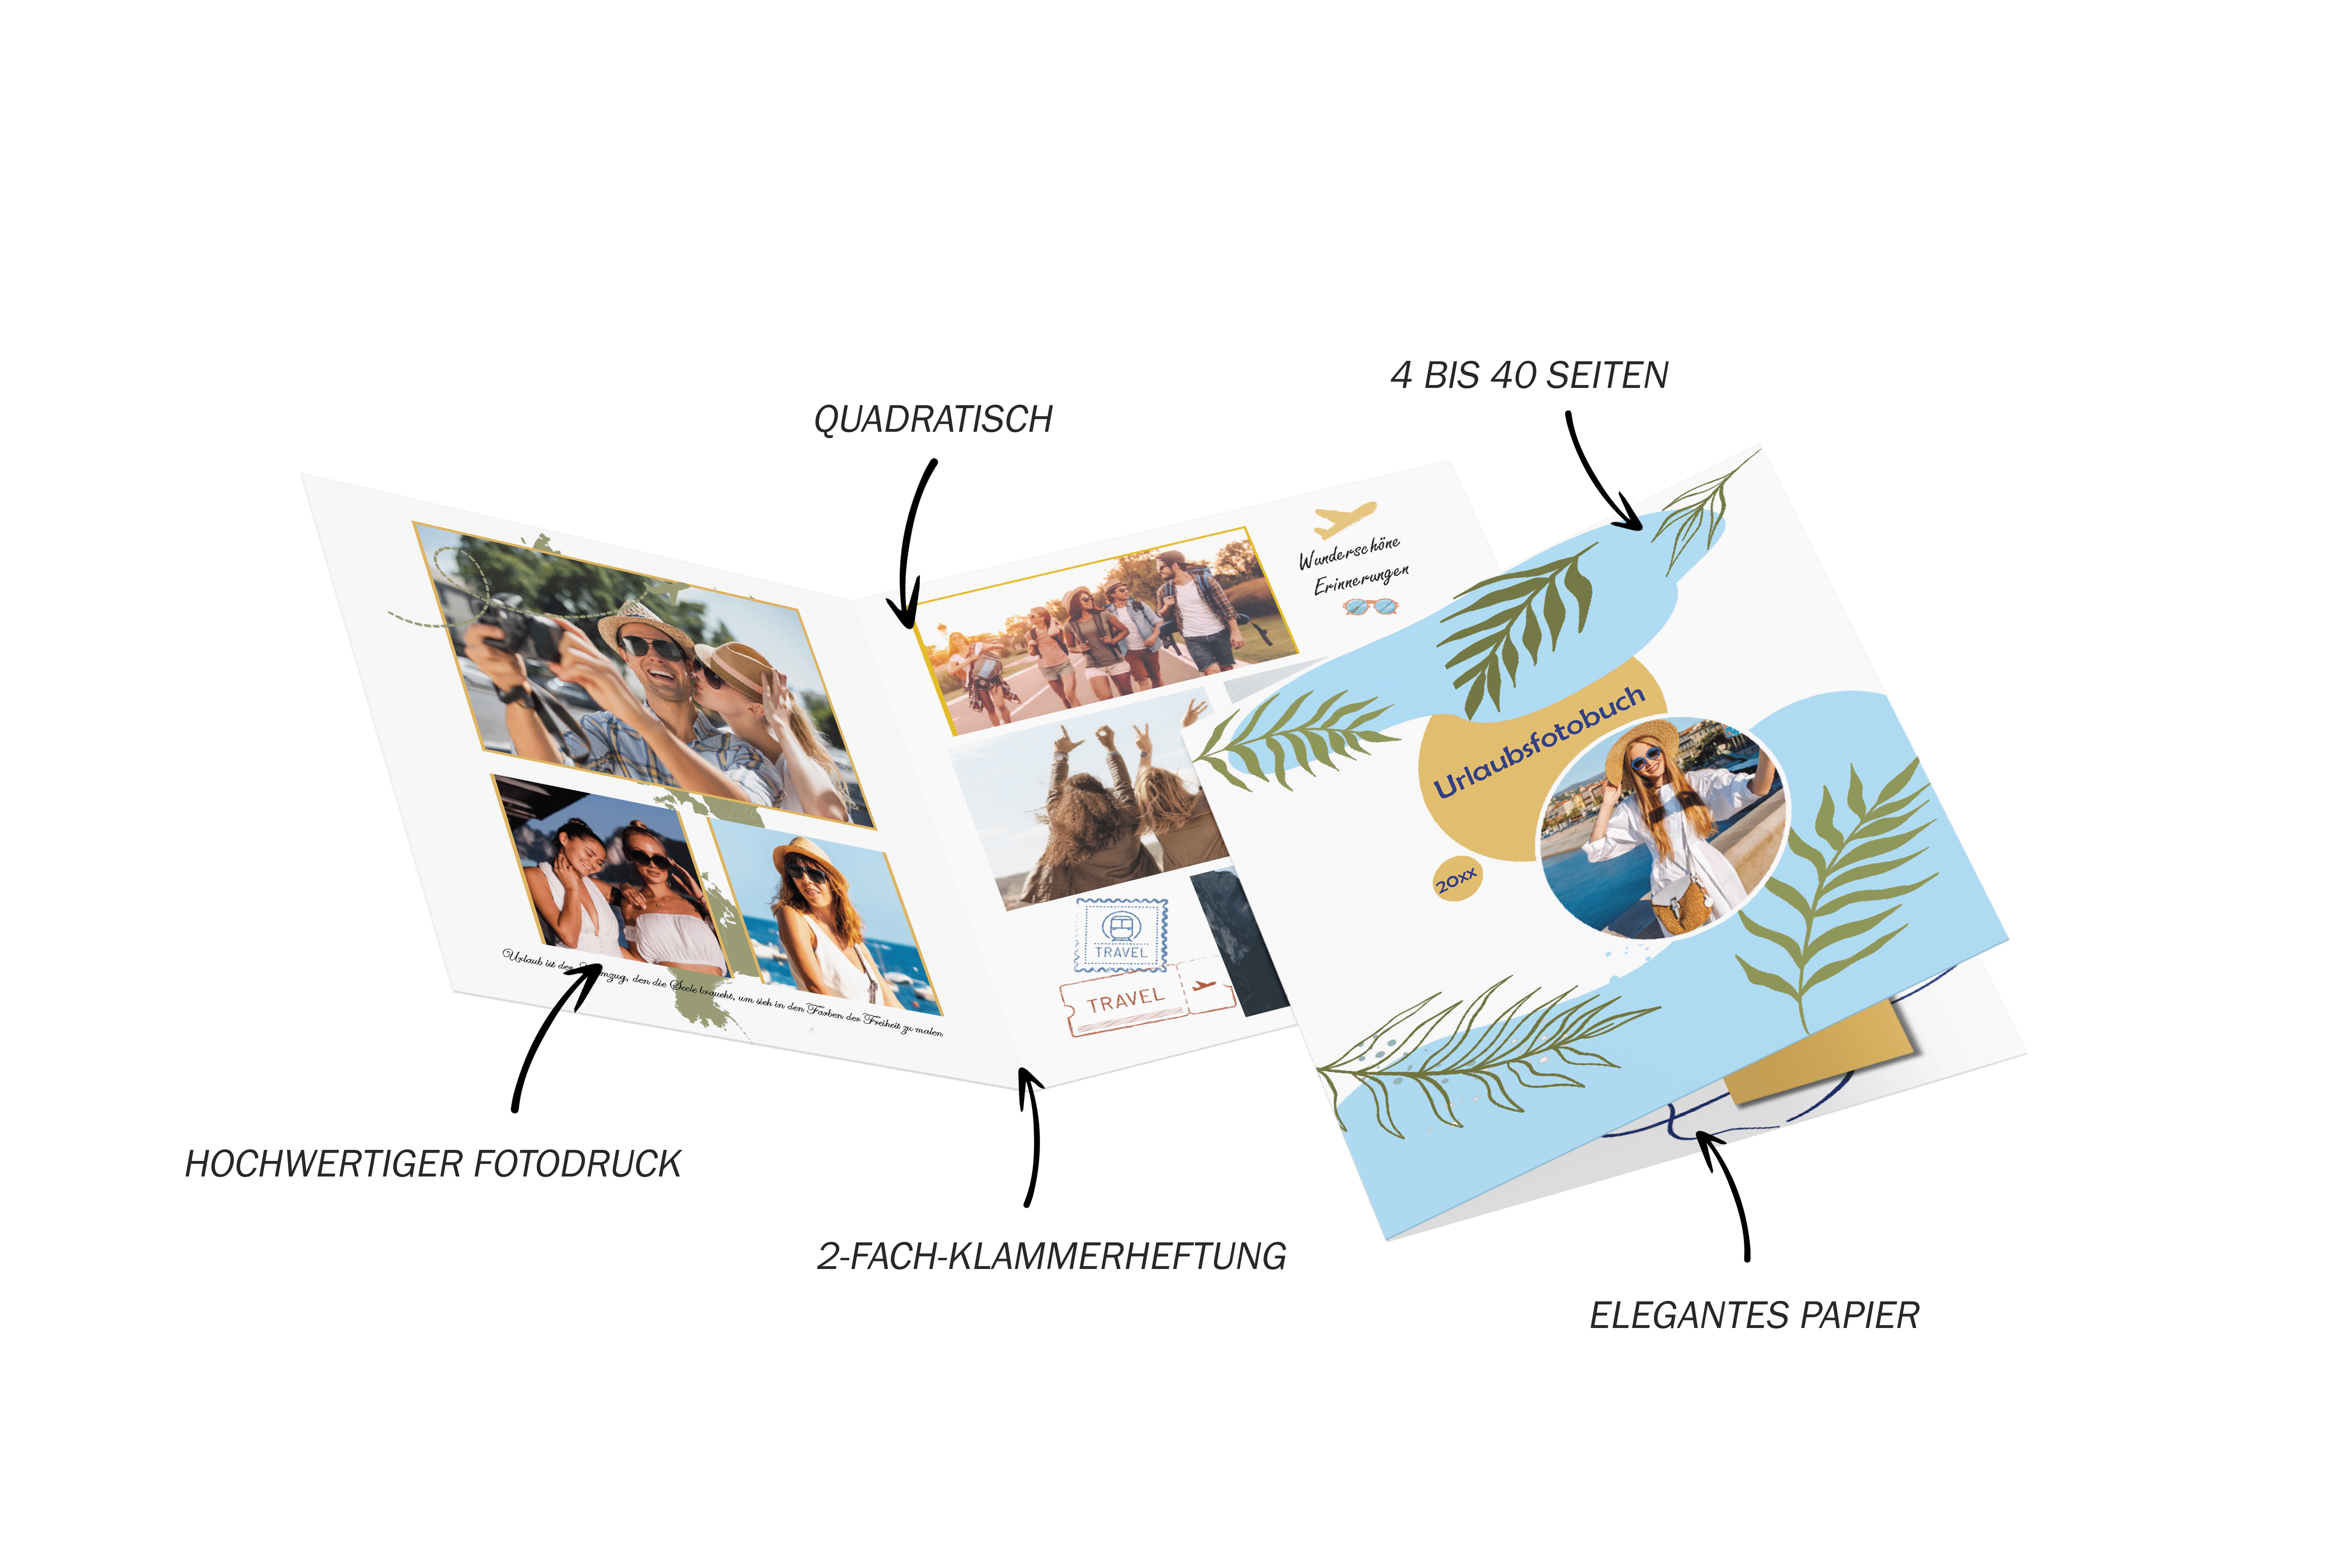 Design and print holiday photo book in square format